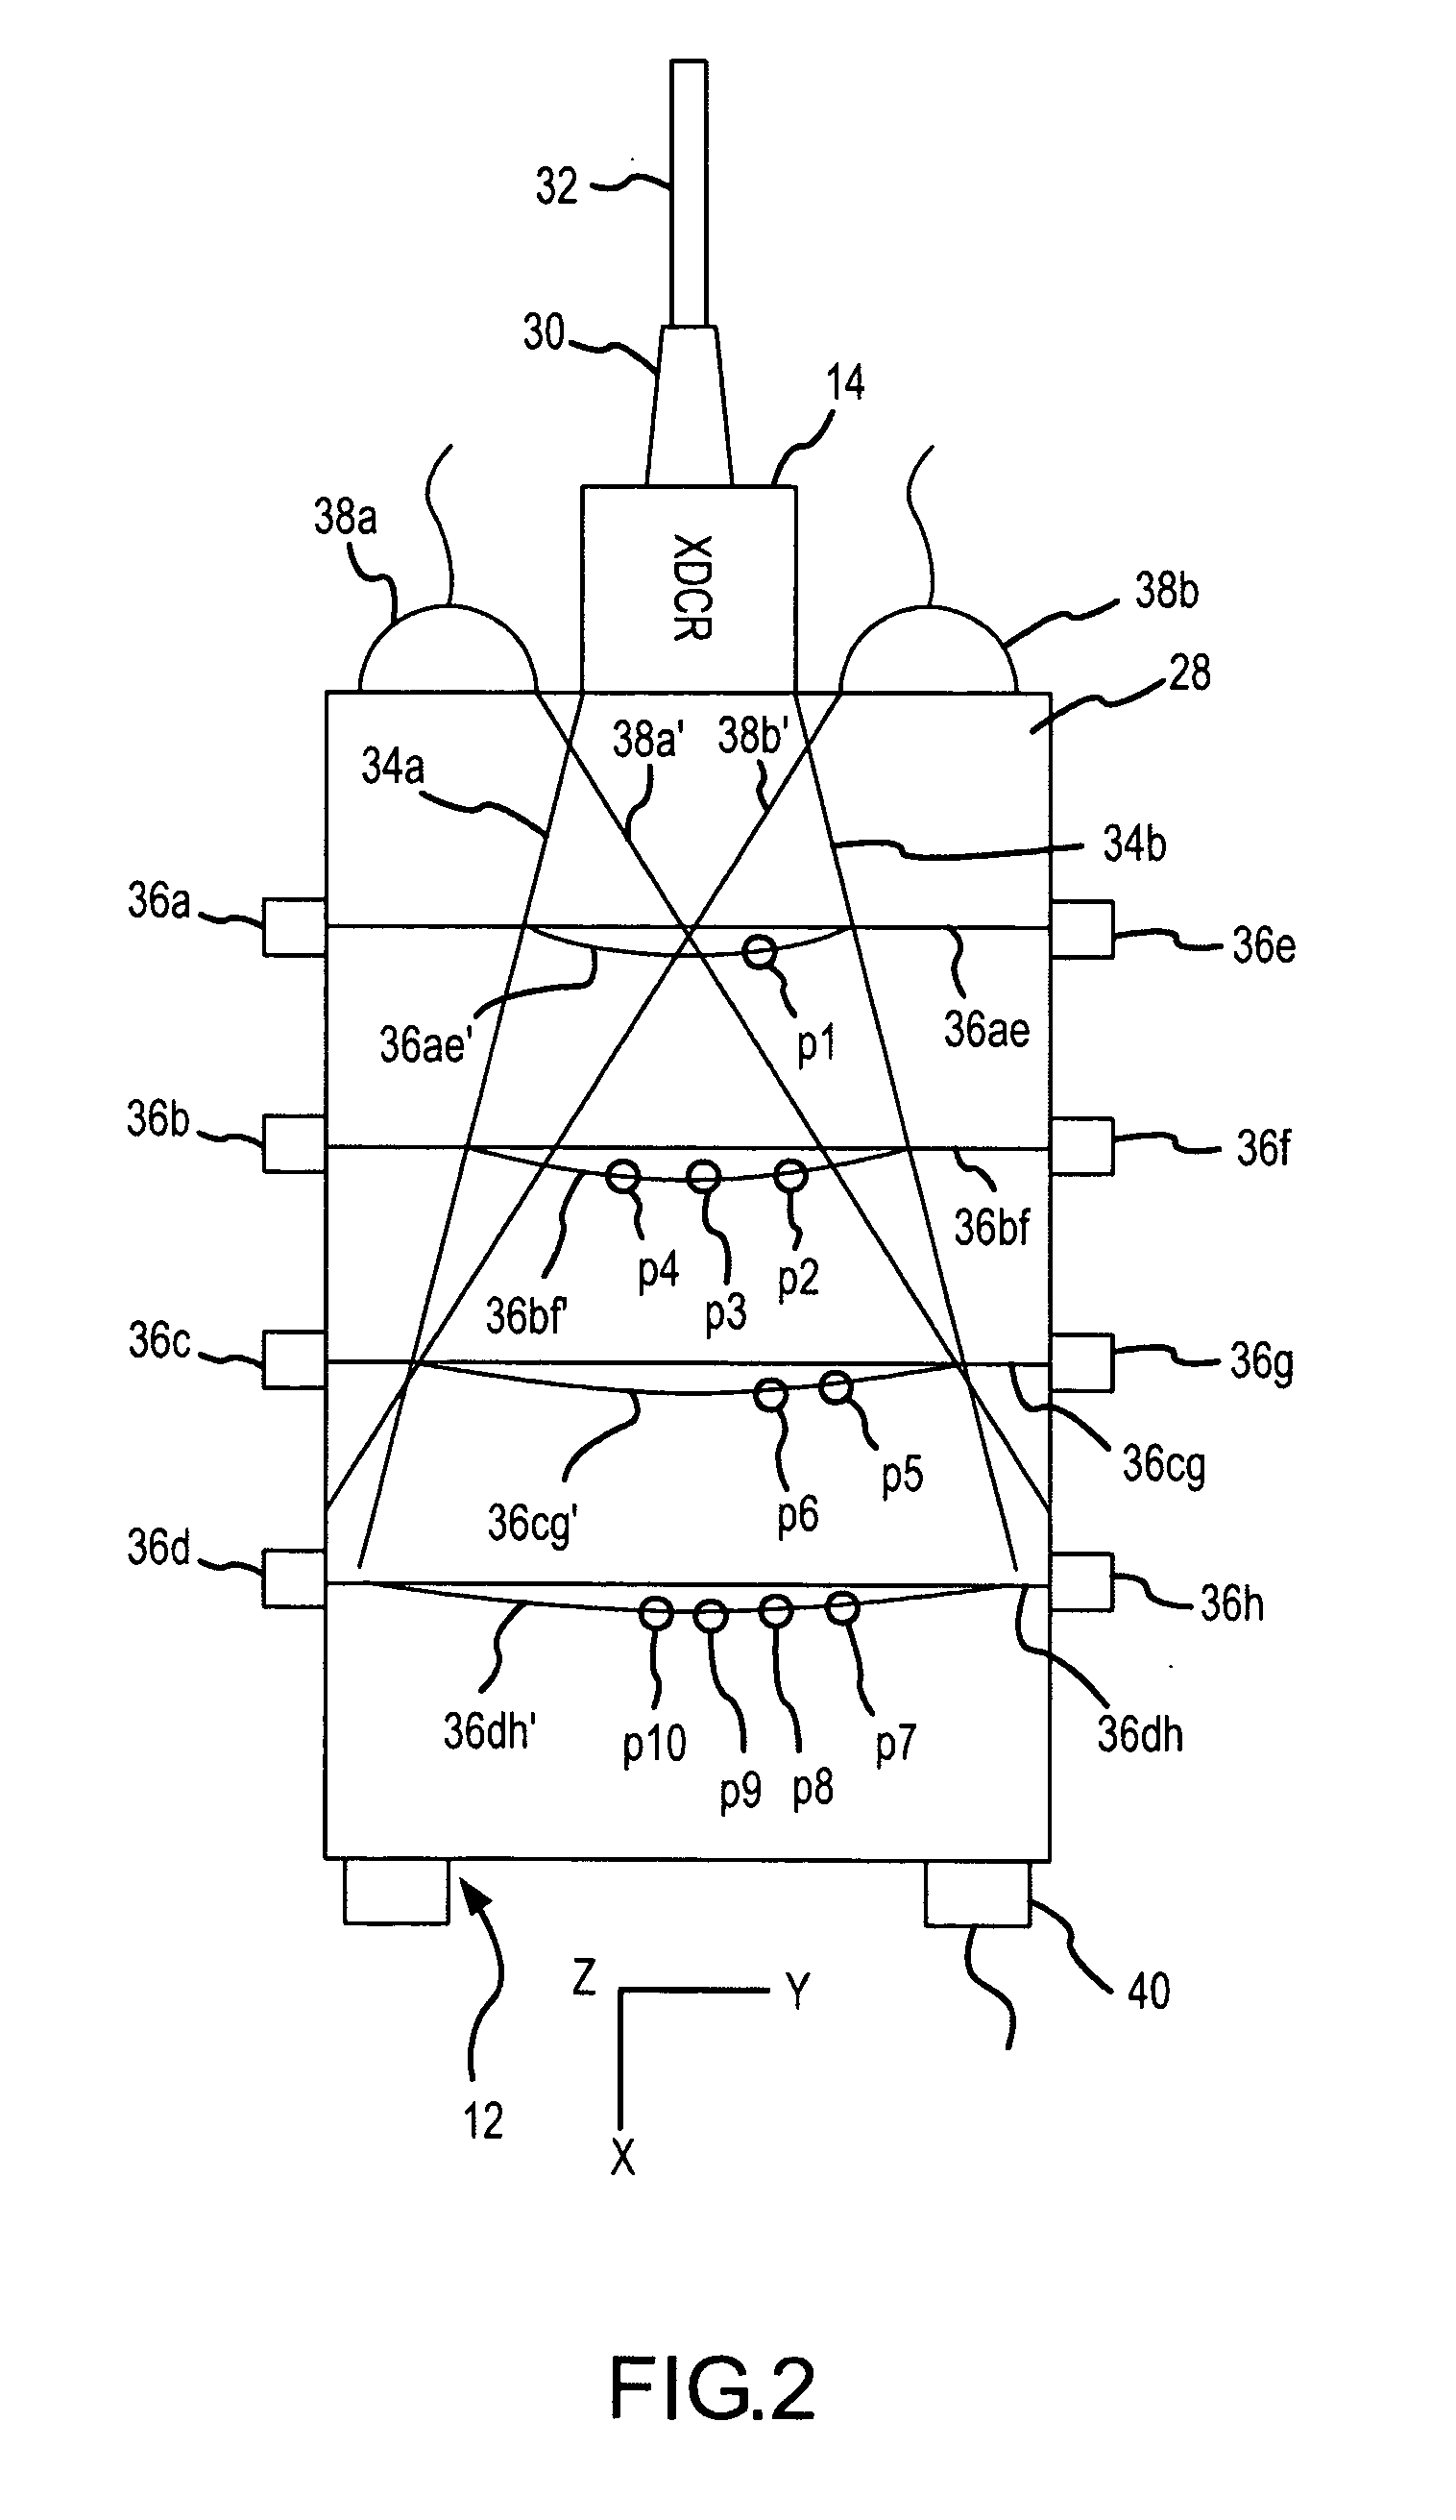 Optical techniques and system for 3-D characterization of ultrasound beams